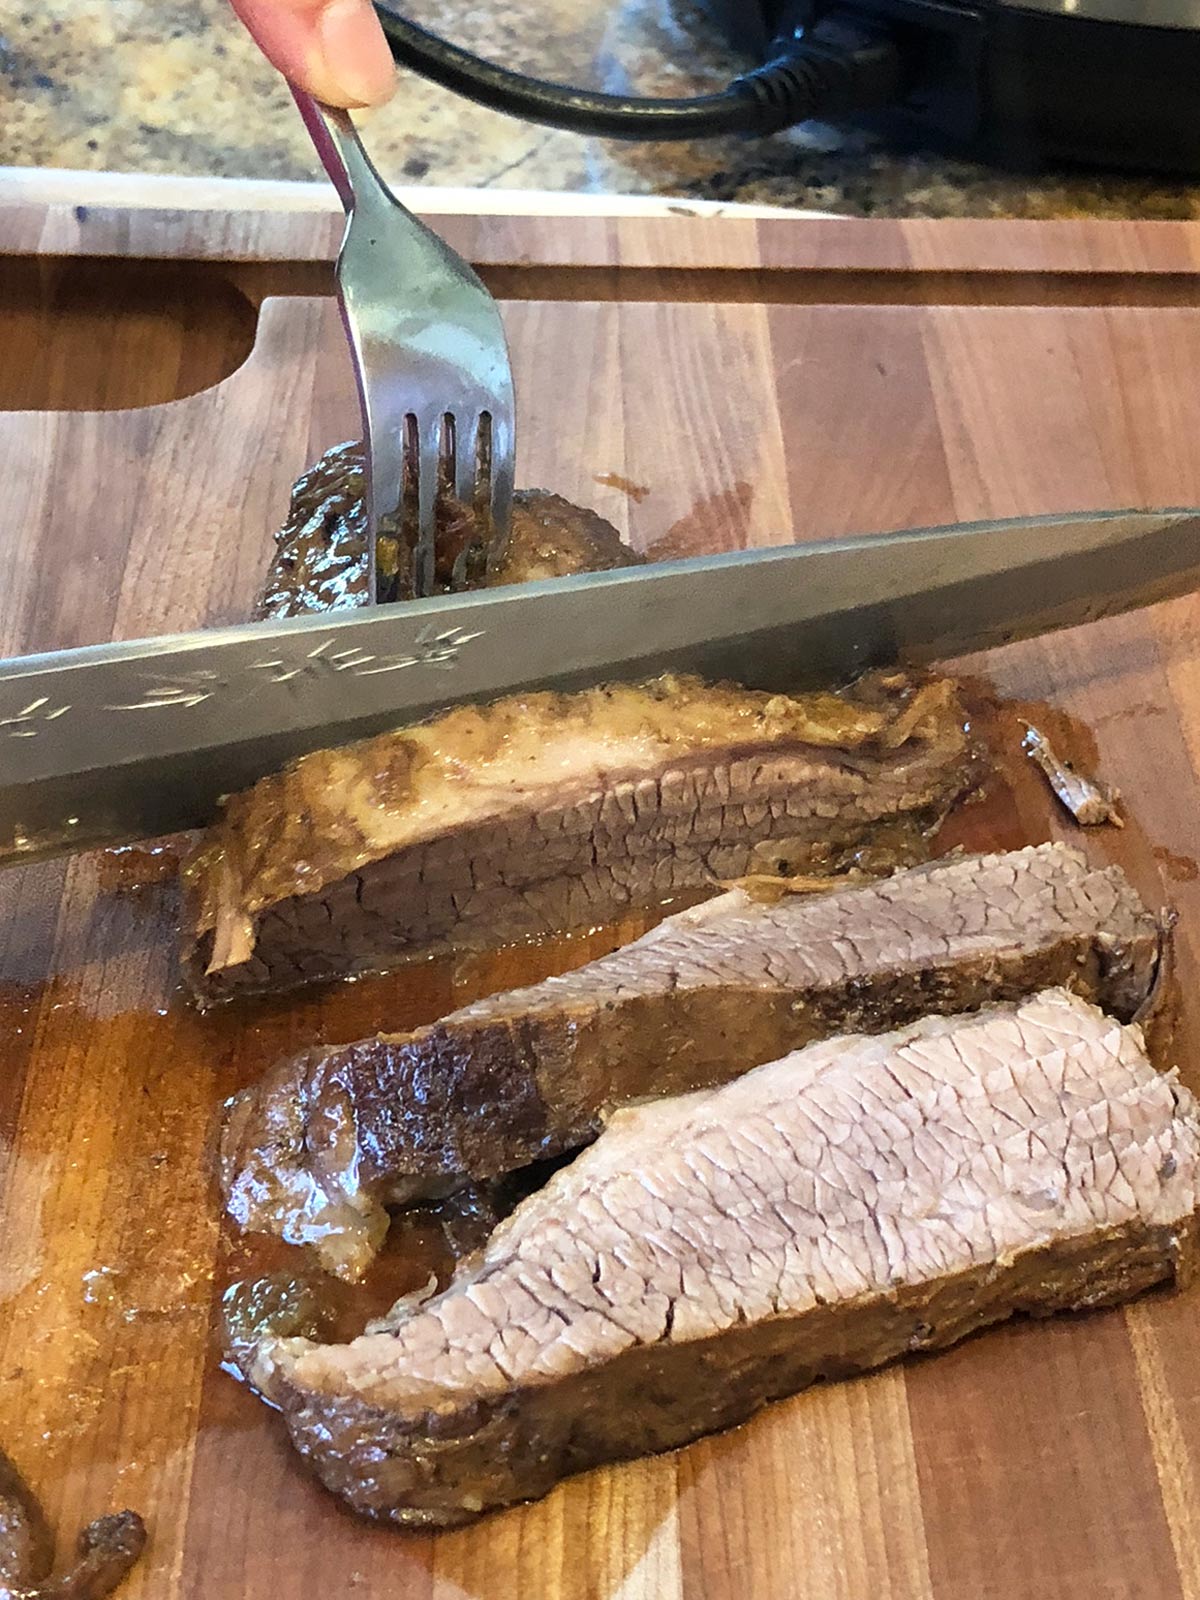 Person slicing brisket on a wooden cutting board.